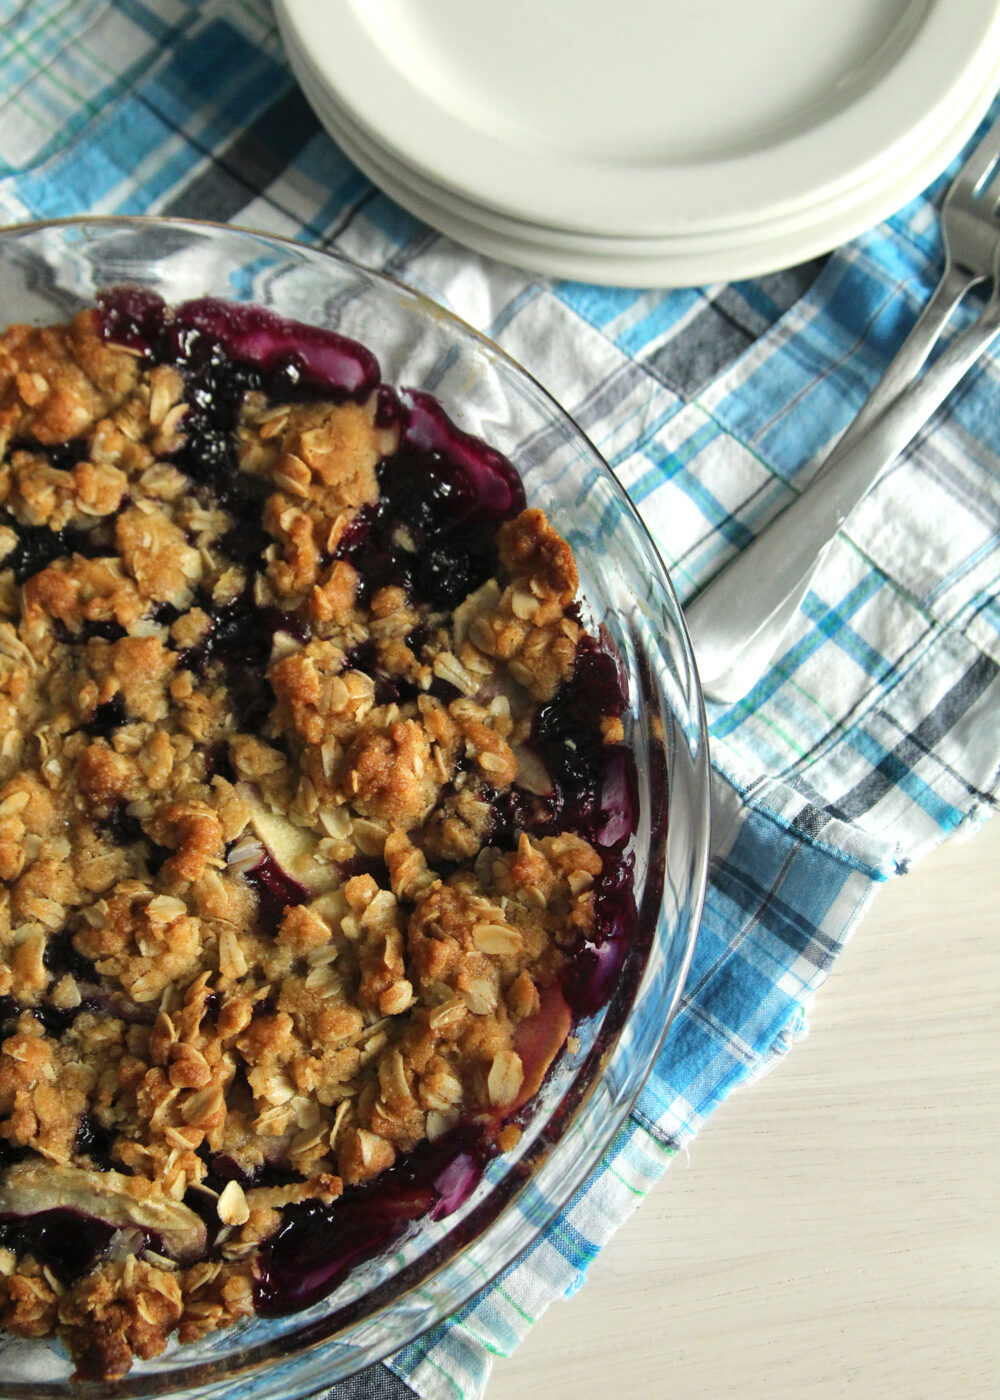 A purple mixture can be seen beneath a golden brown crumble in a clear pie plate set on a blue plaid fabric with white plates and forks nearby.